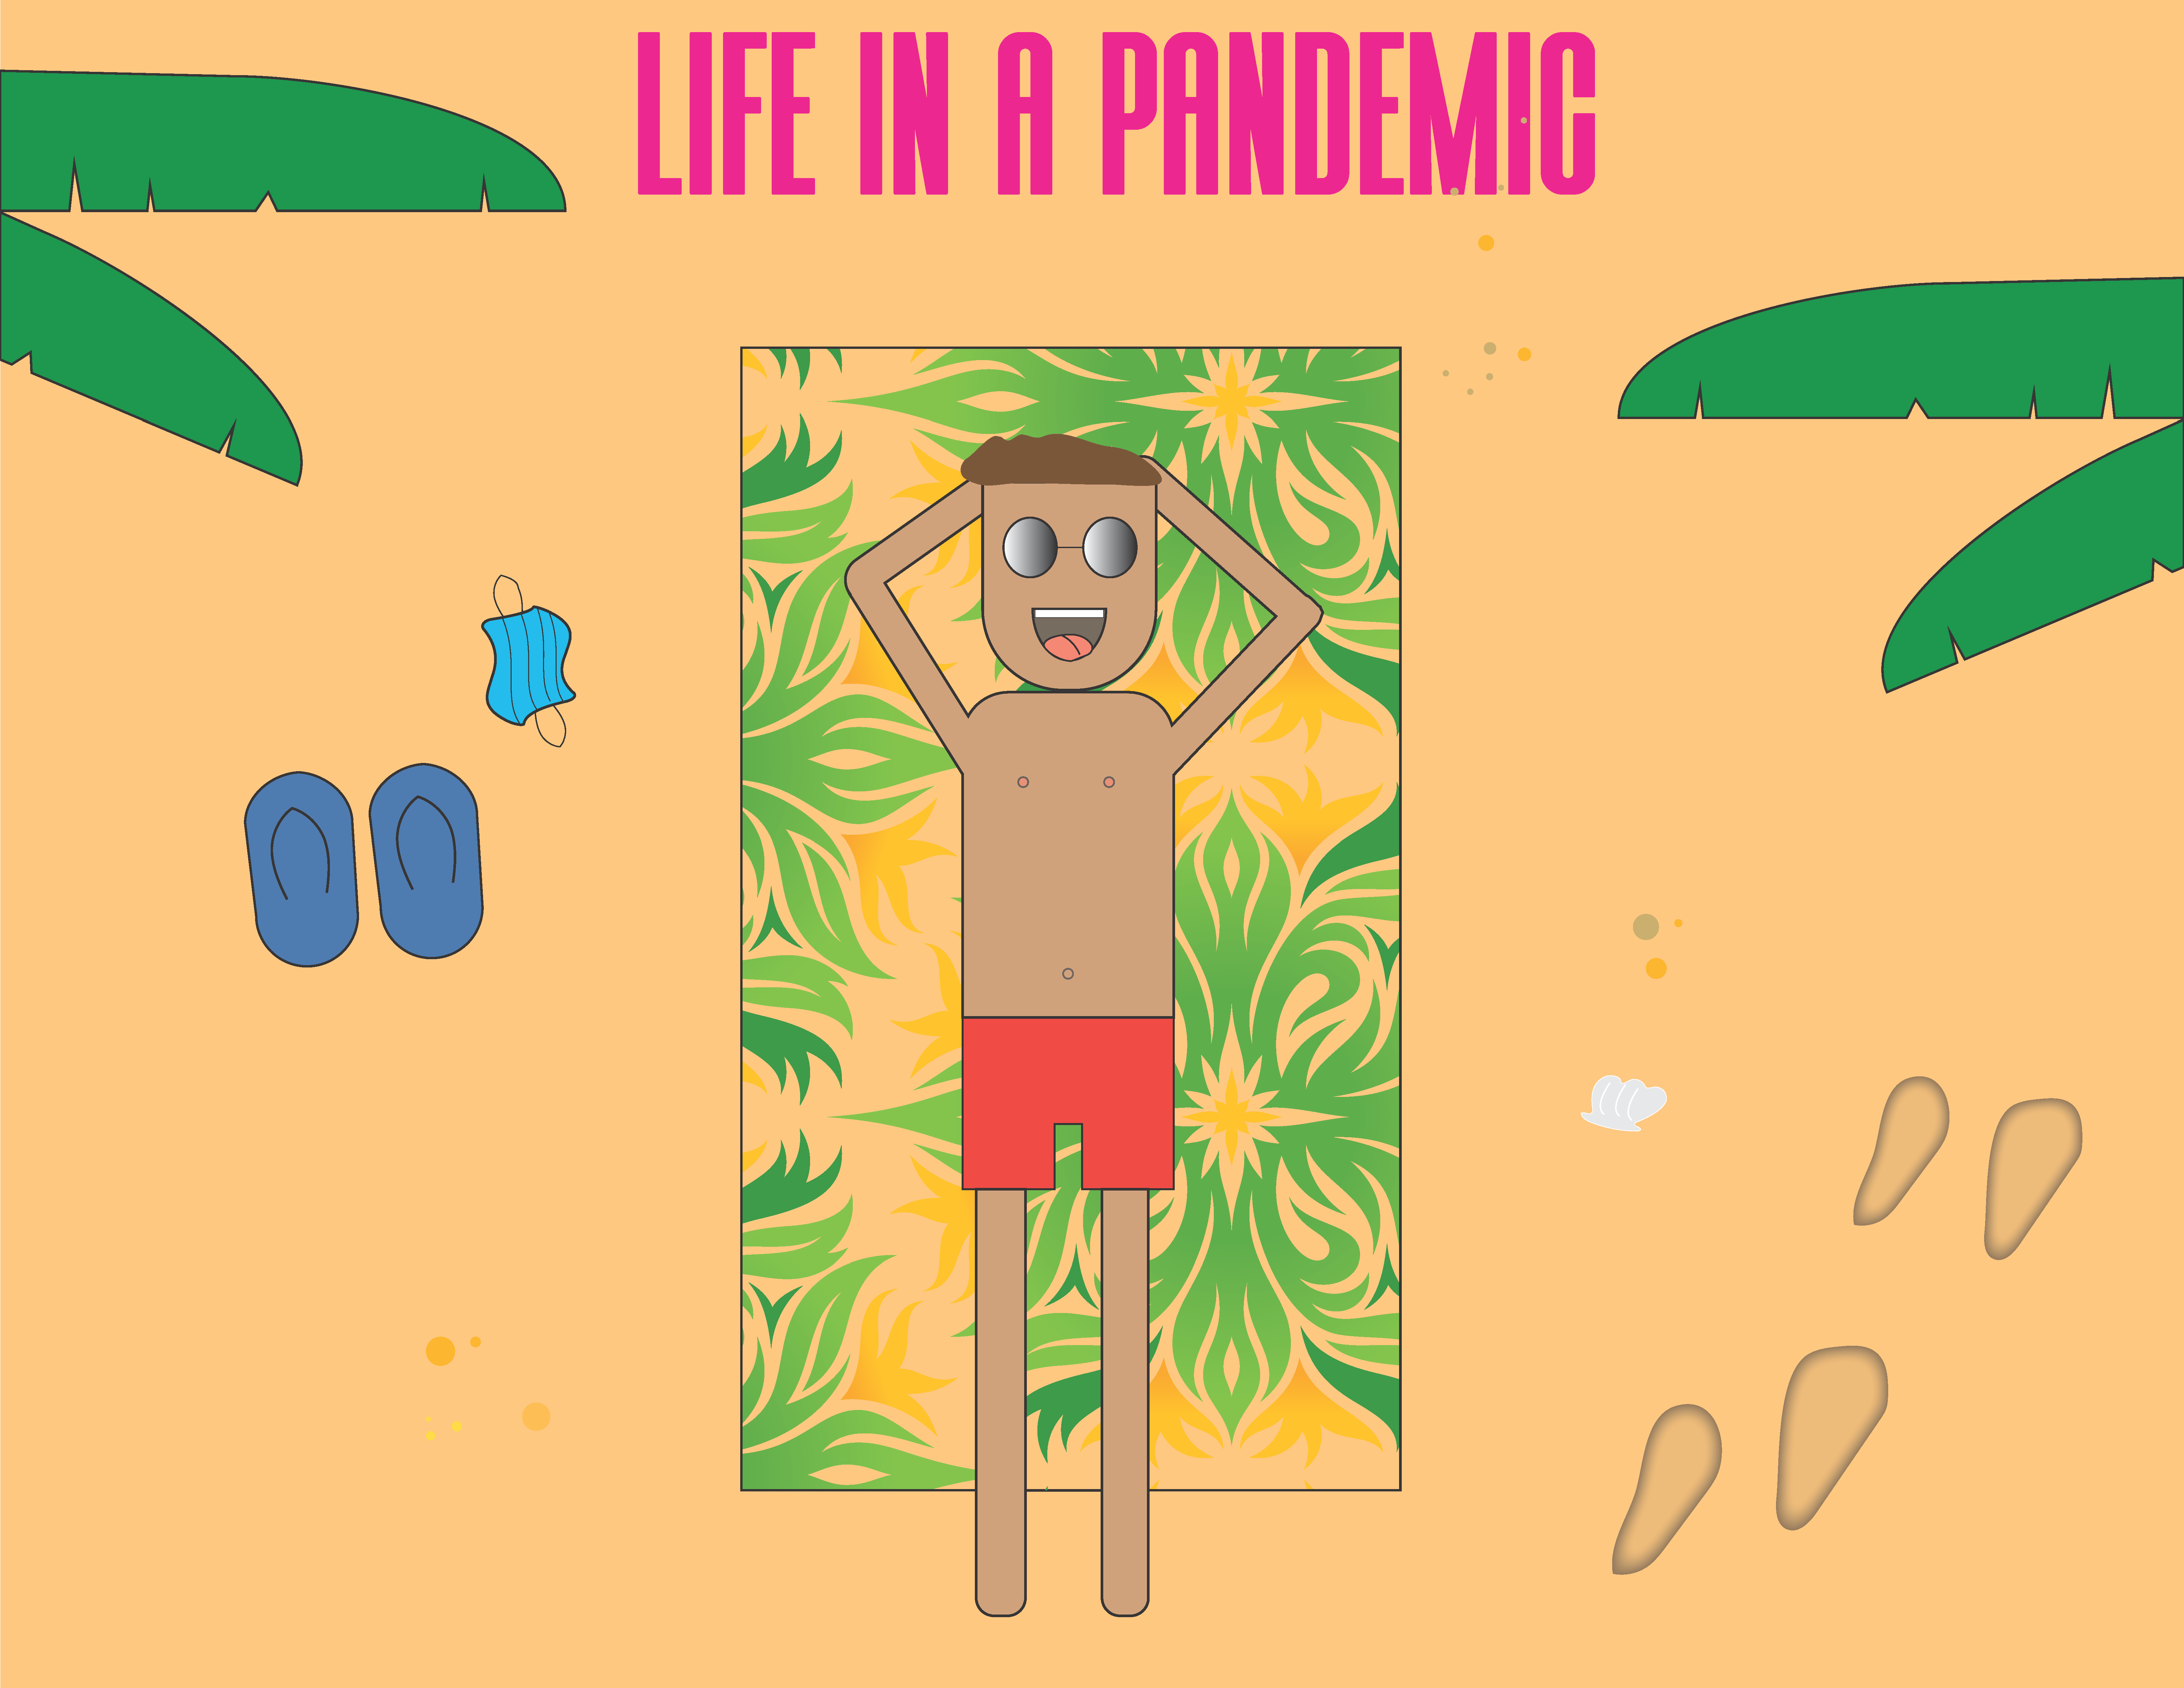 Life in a Pandemic by Natalie Thornton